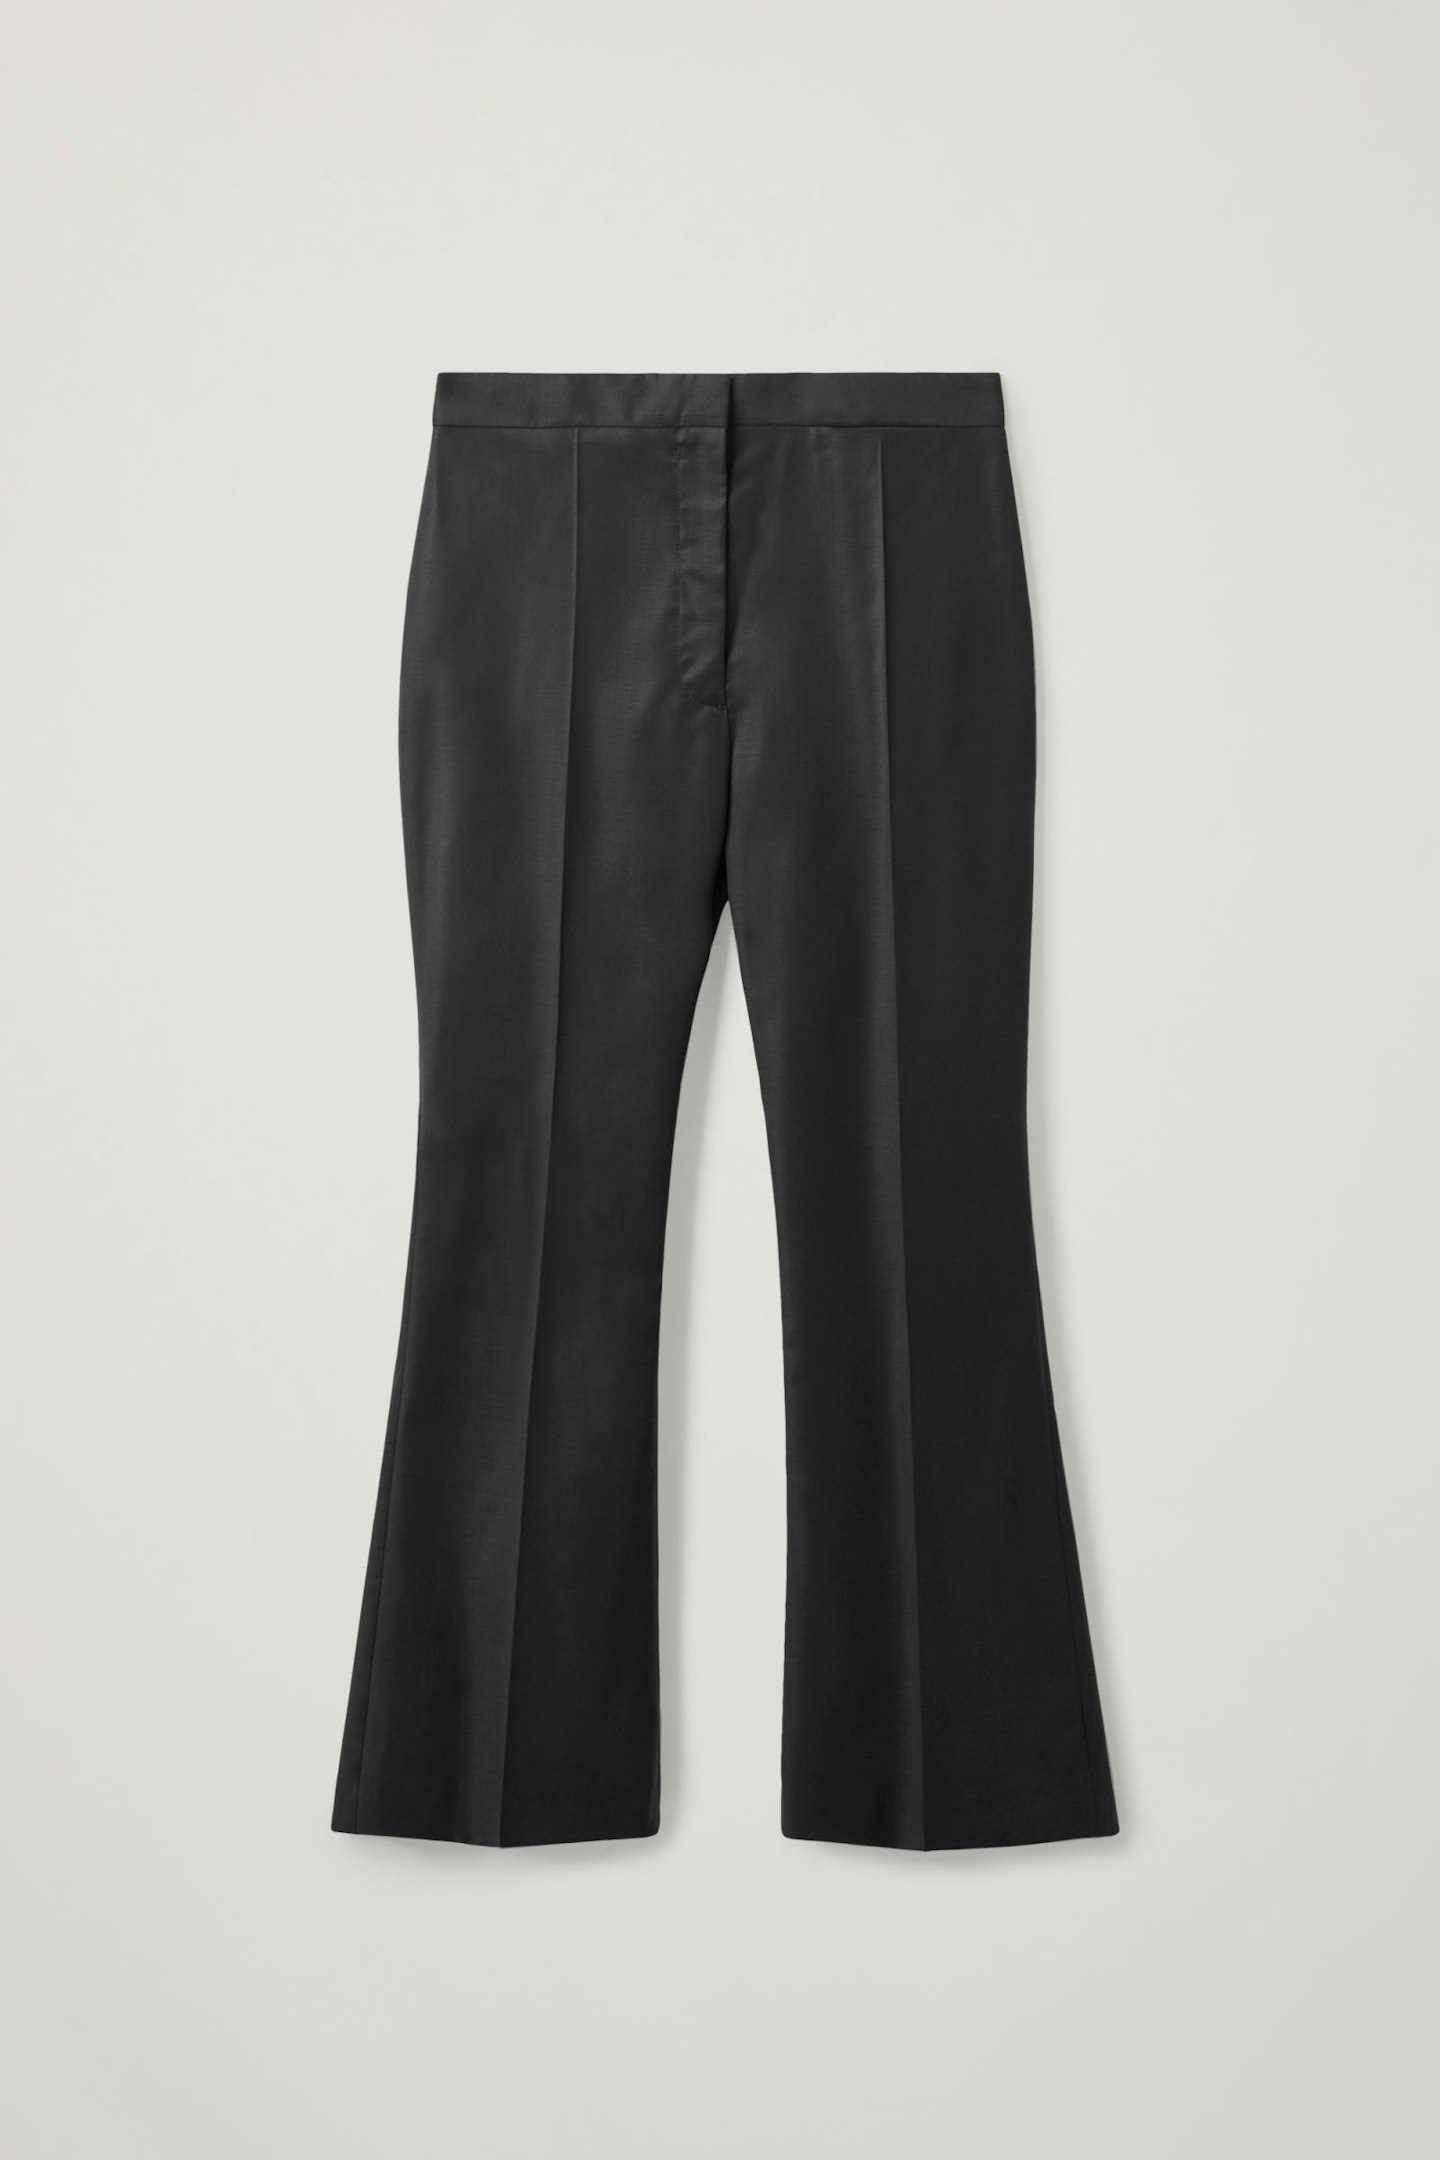 COS, High-Waisted Wool Flared Trousers, £99